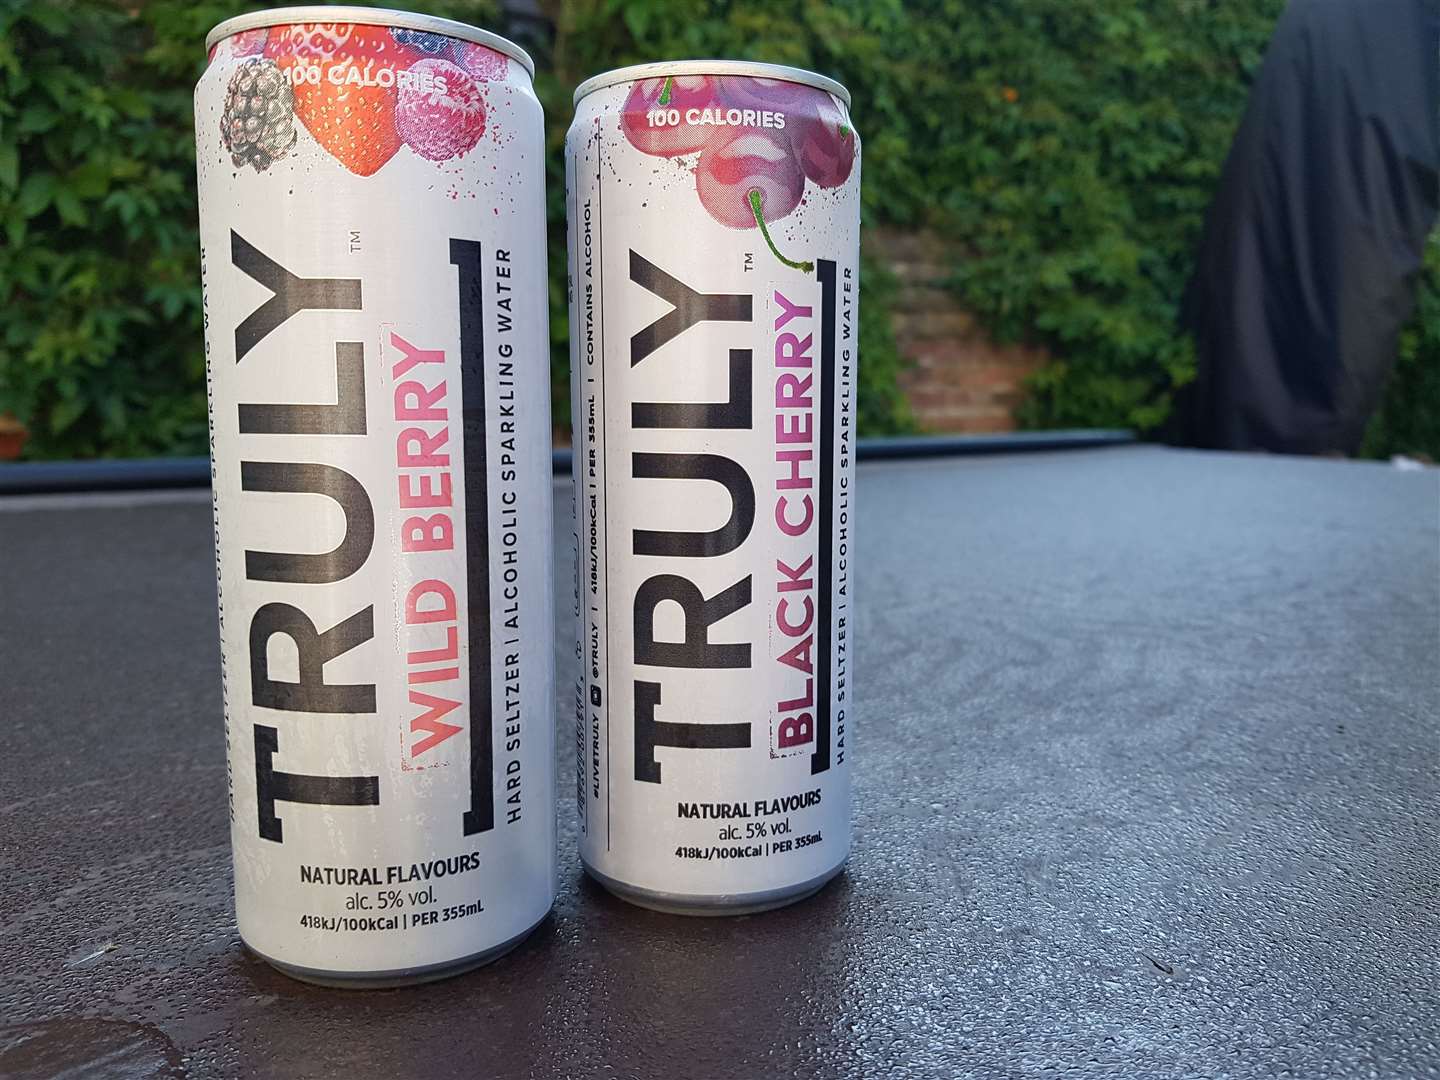 Wild berry and black cherry face the taste test